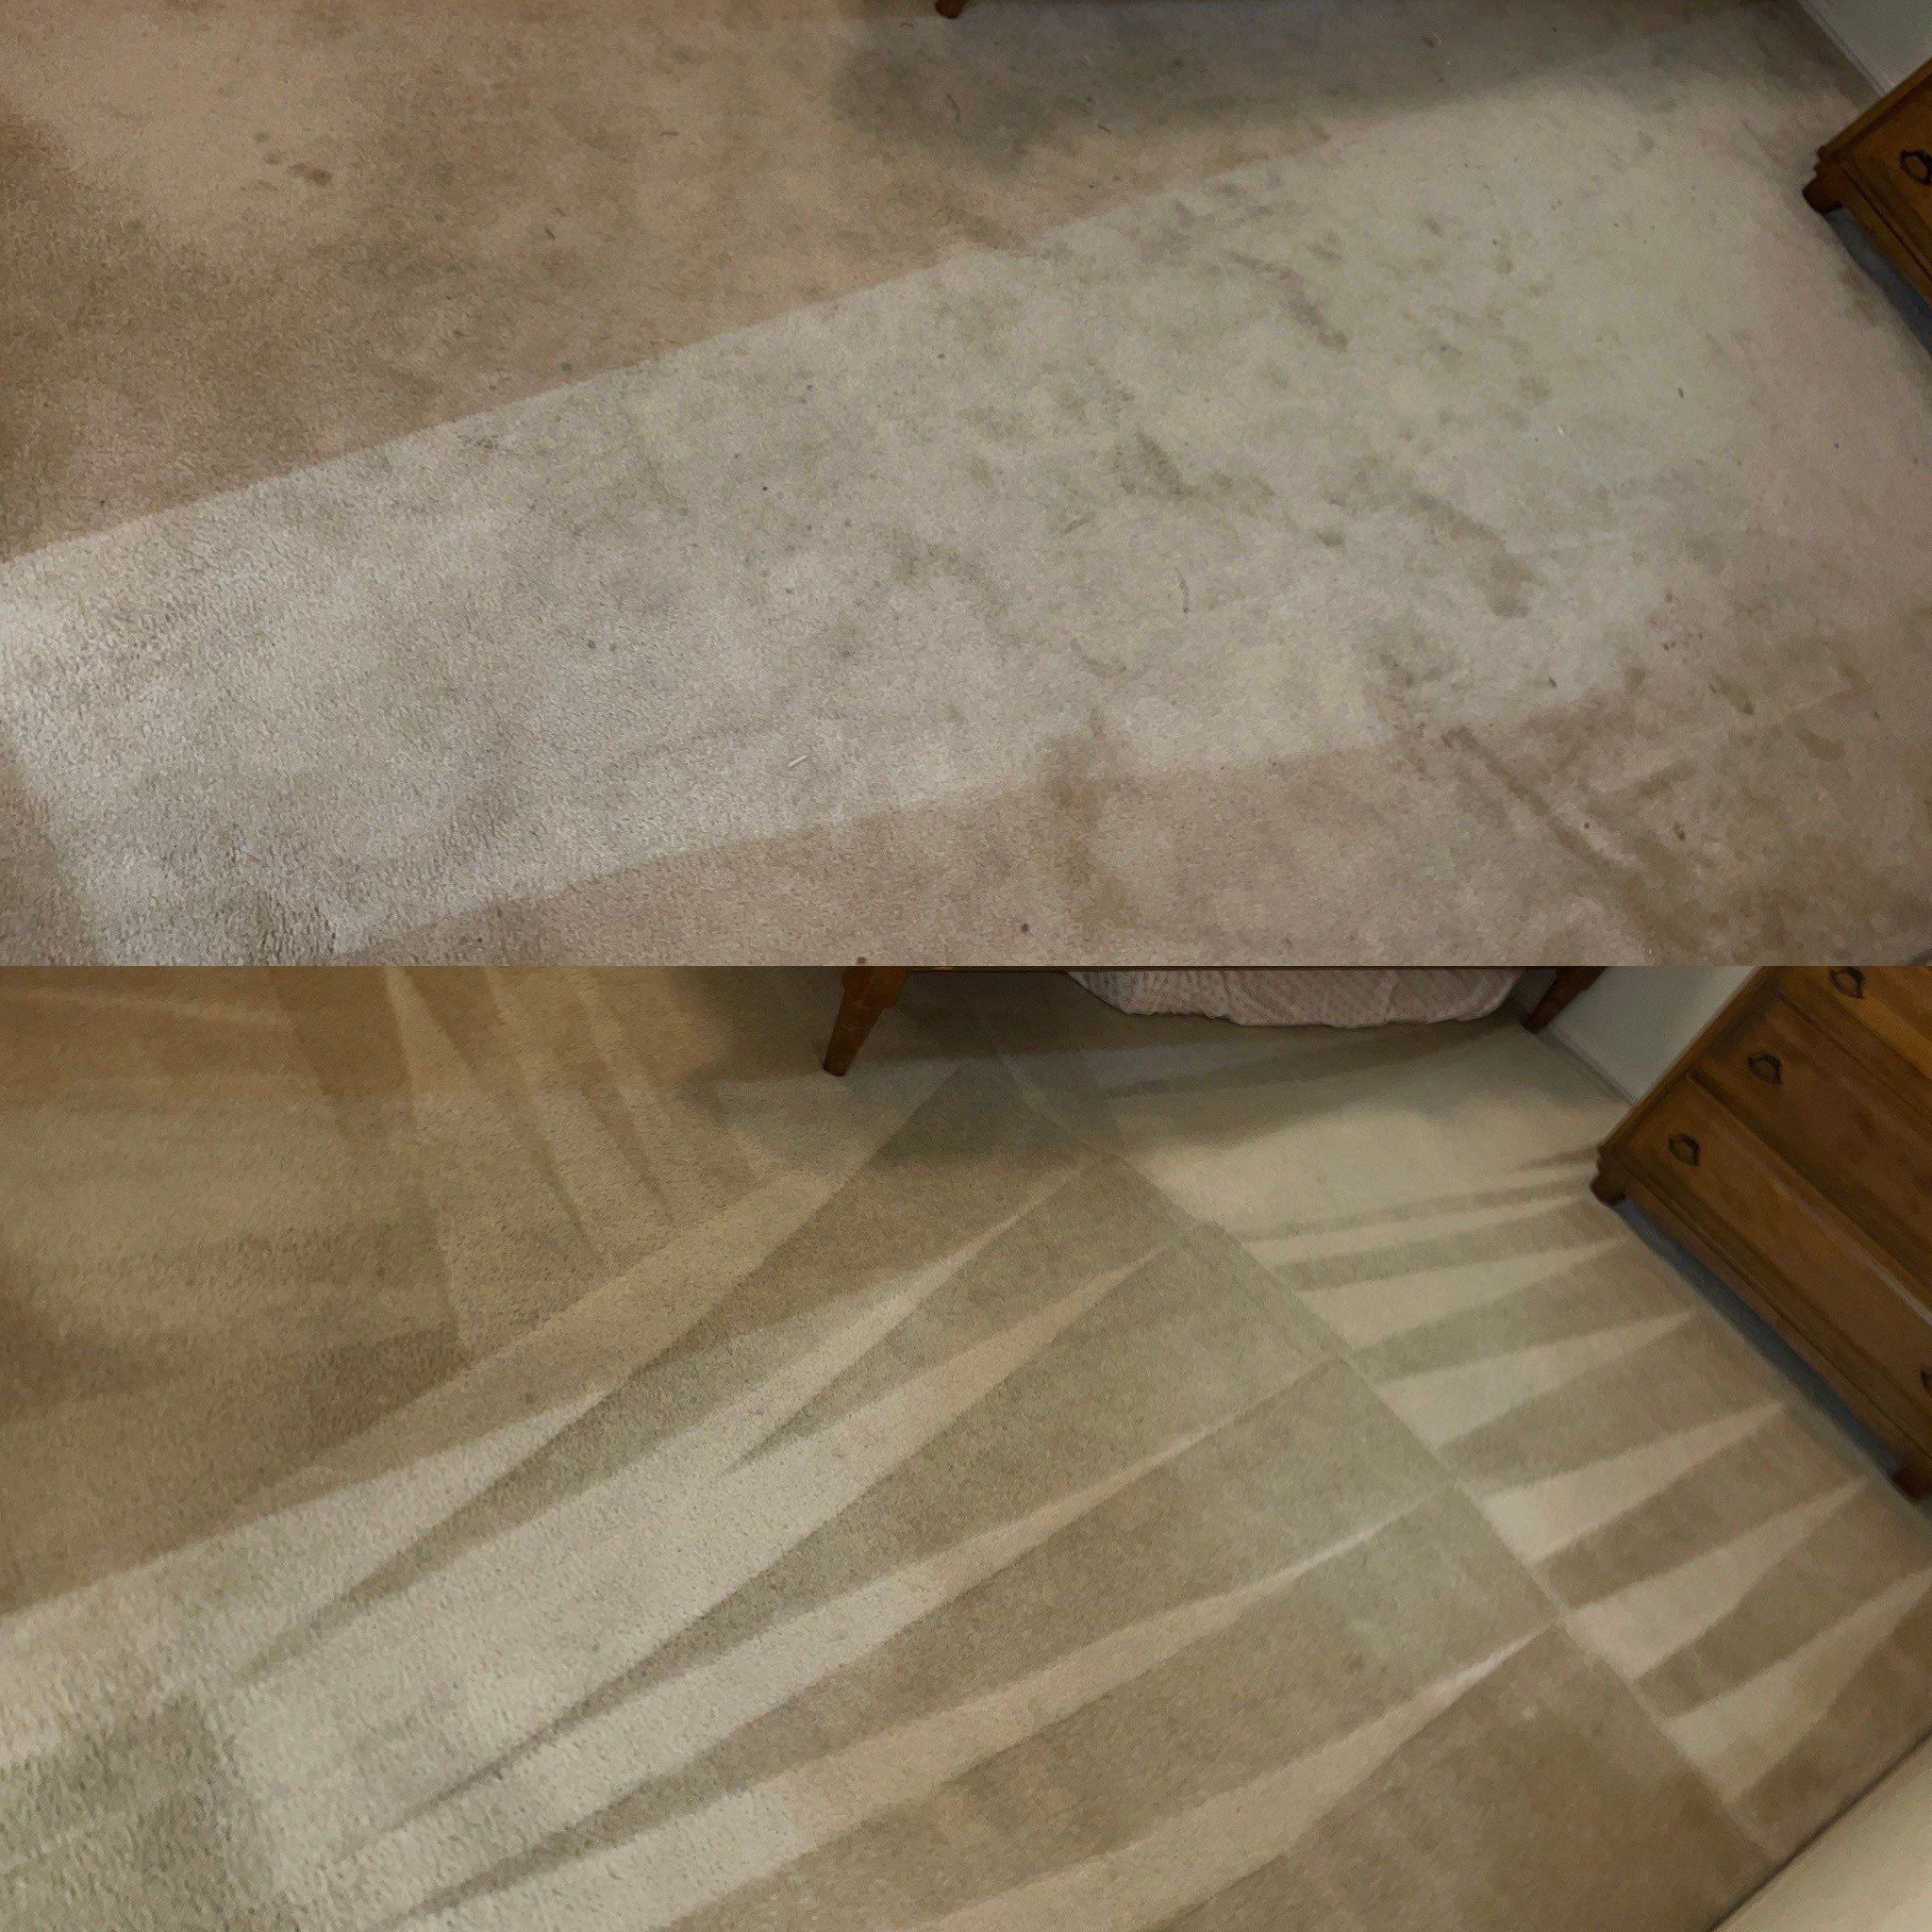 carpet cleaning showing a dramatic before and after effect the carpet has been thoroughly cleaned and looks much newer